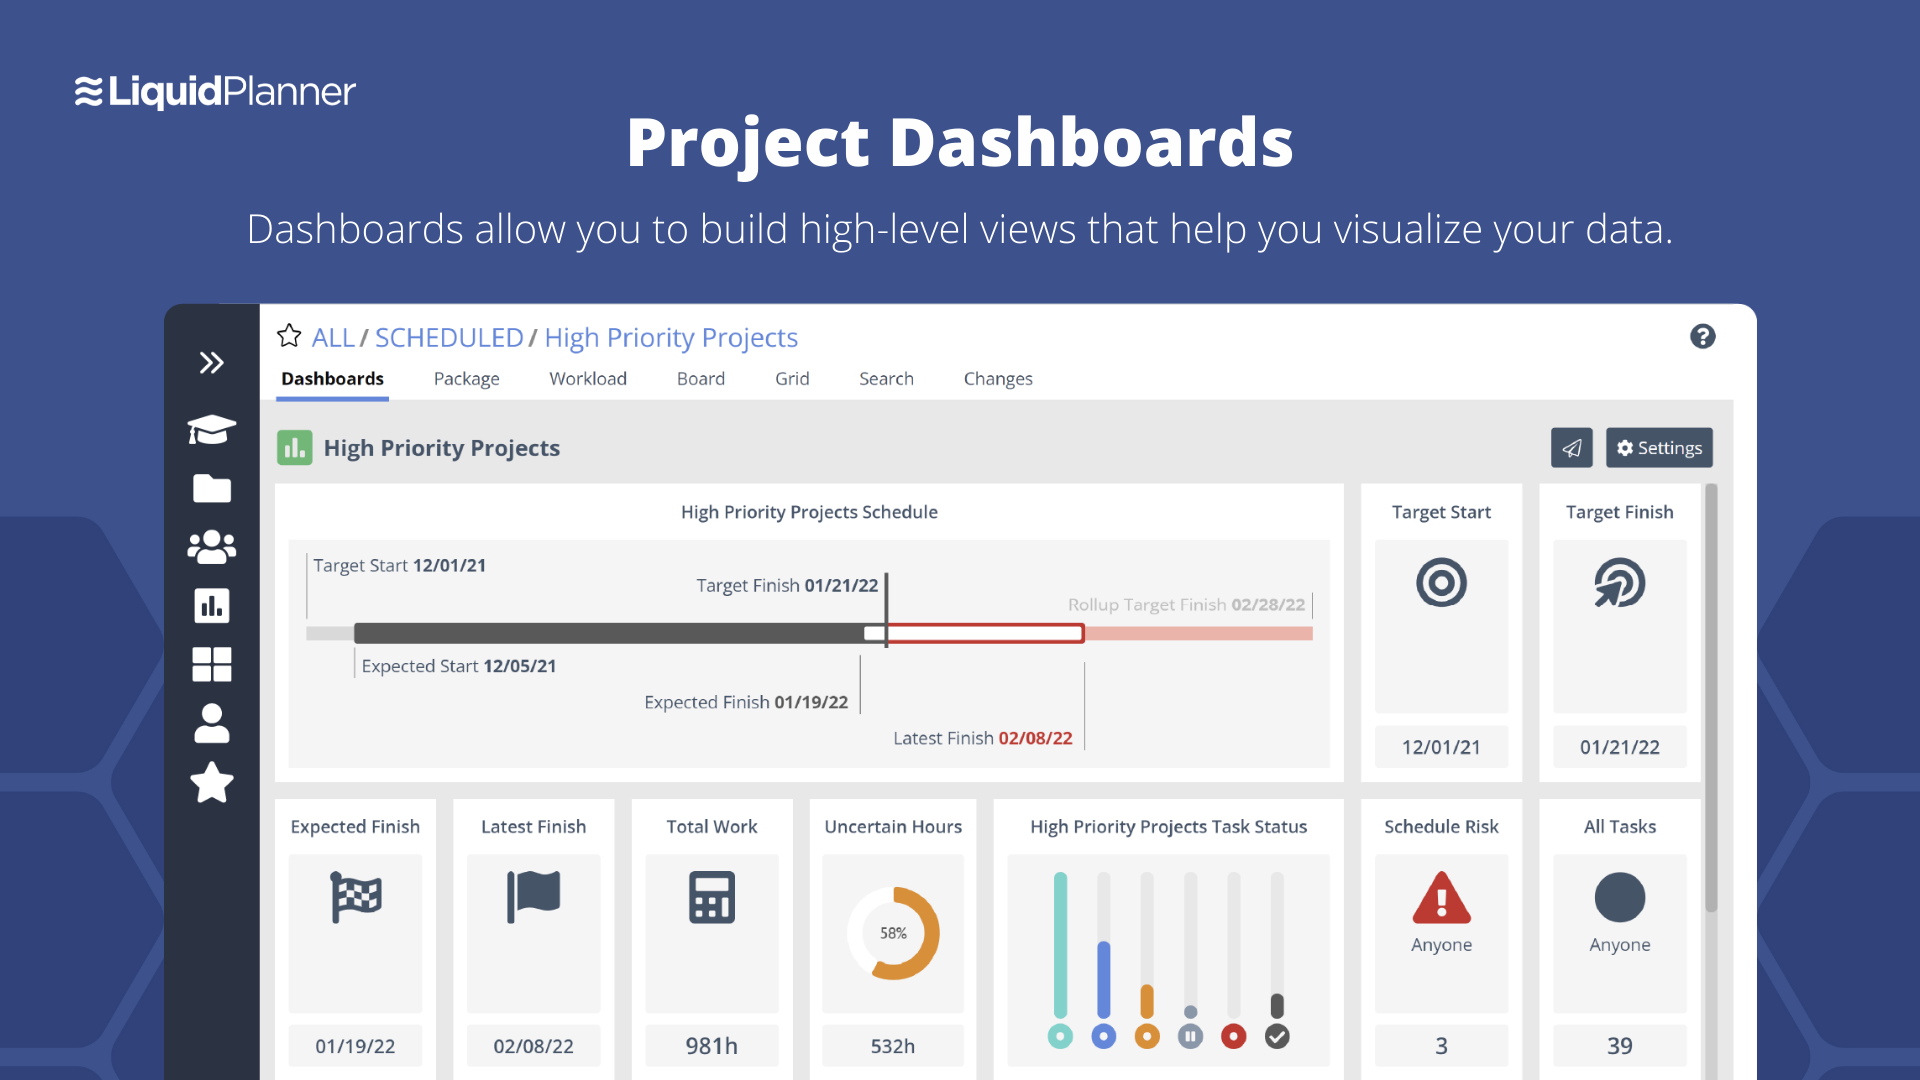 LiquidPlanner - Project Dashboards allow you to build high-level views that help you visualize your data.